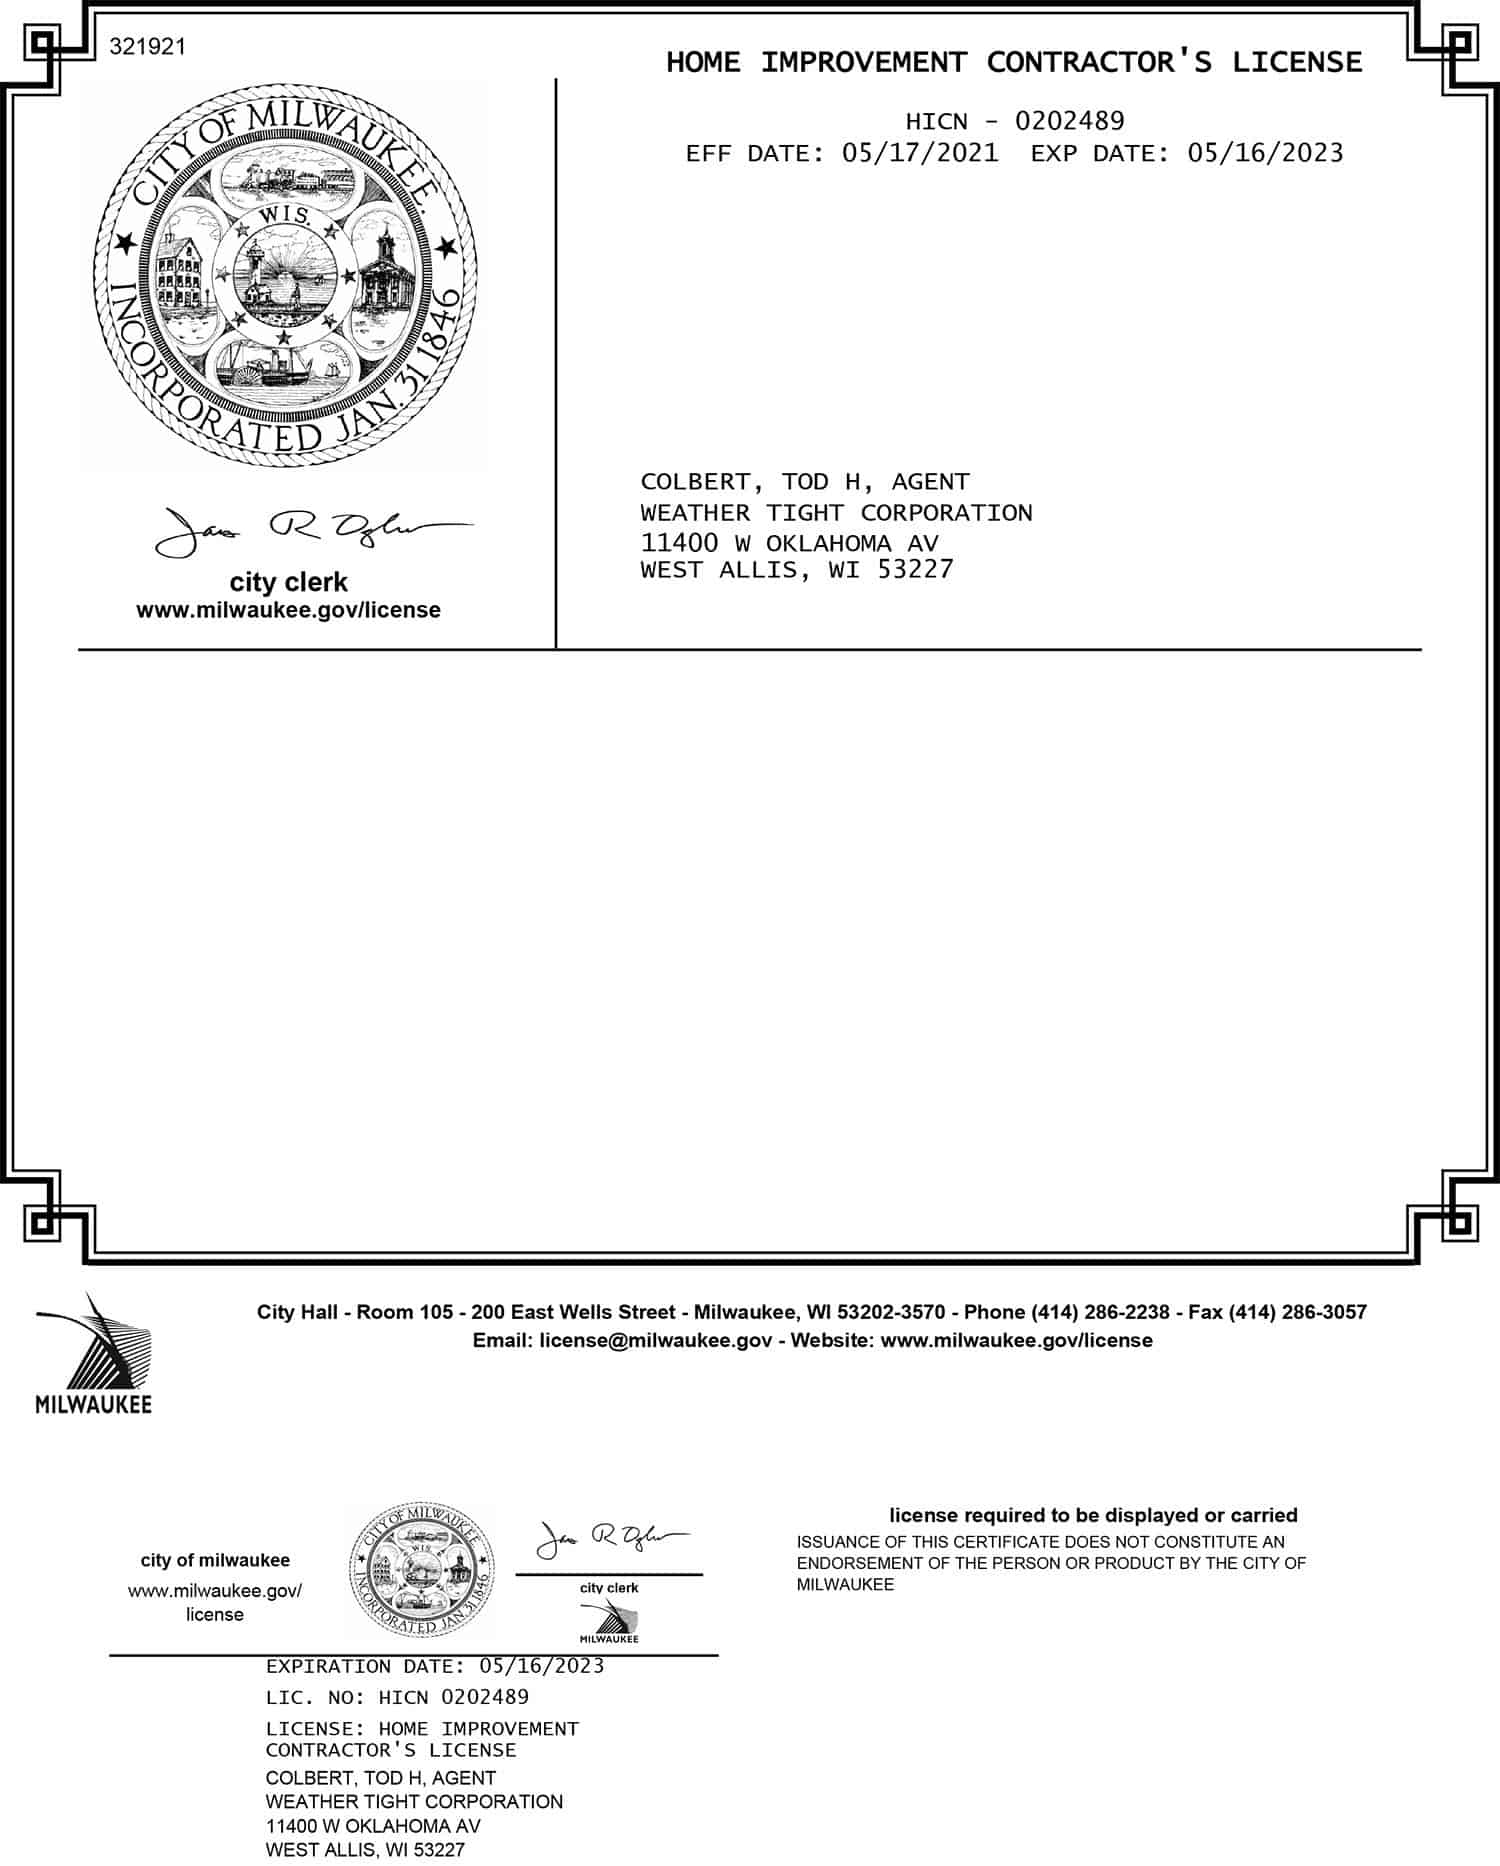 City of Milwaukee Home Improvement Contractor's License Exp 05-16-2023